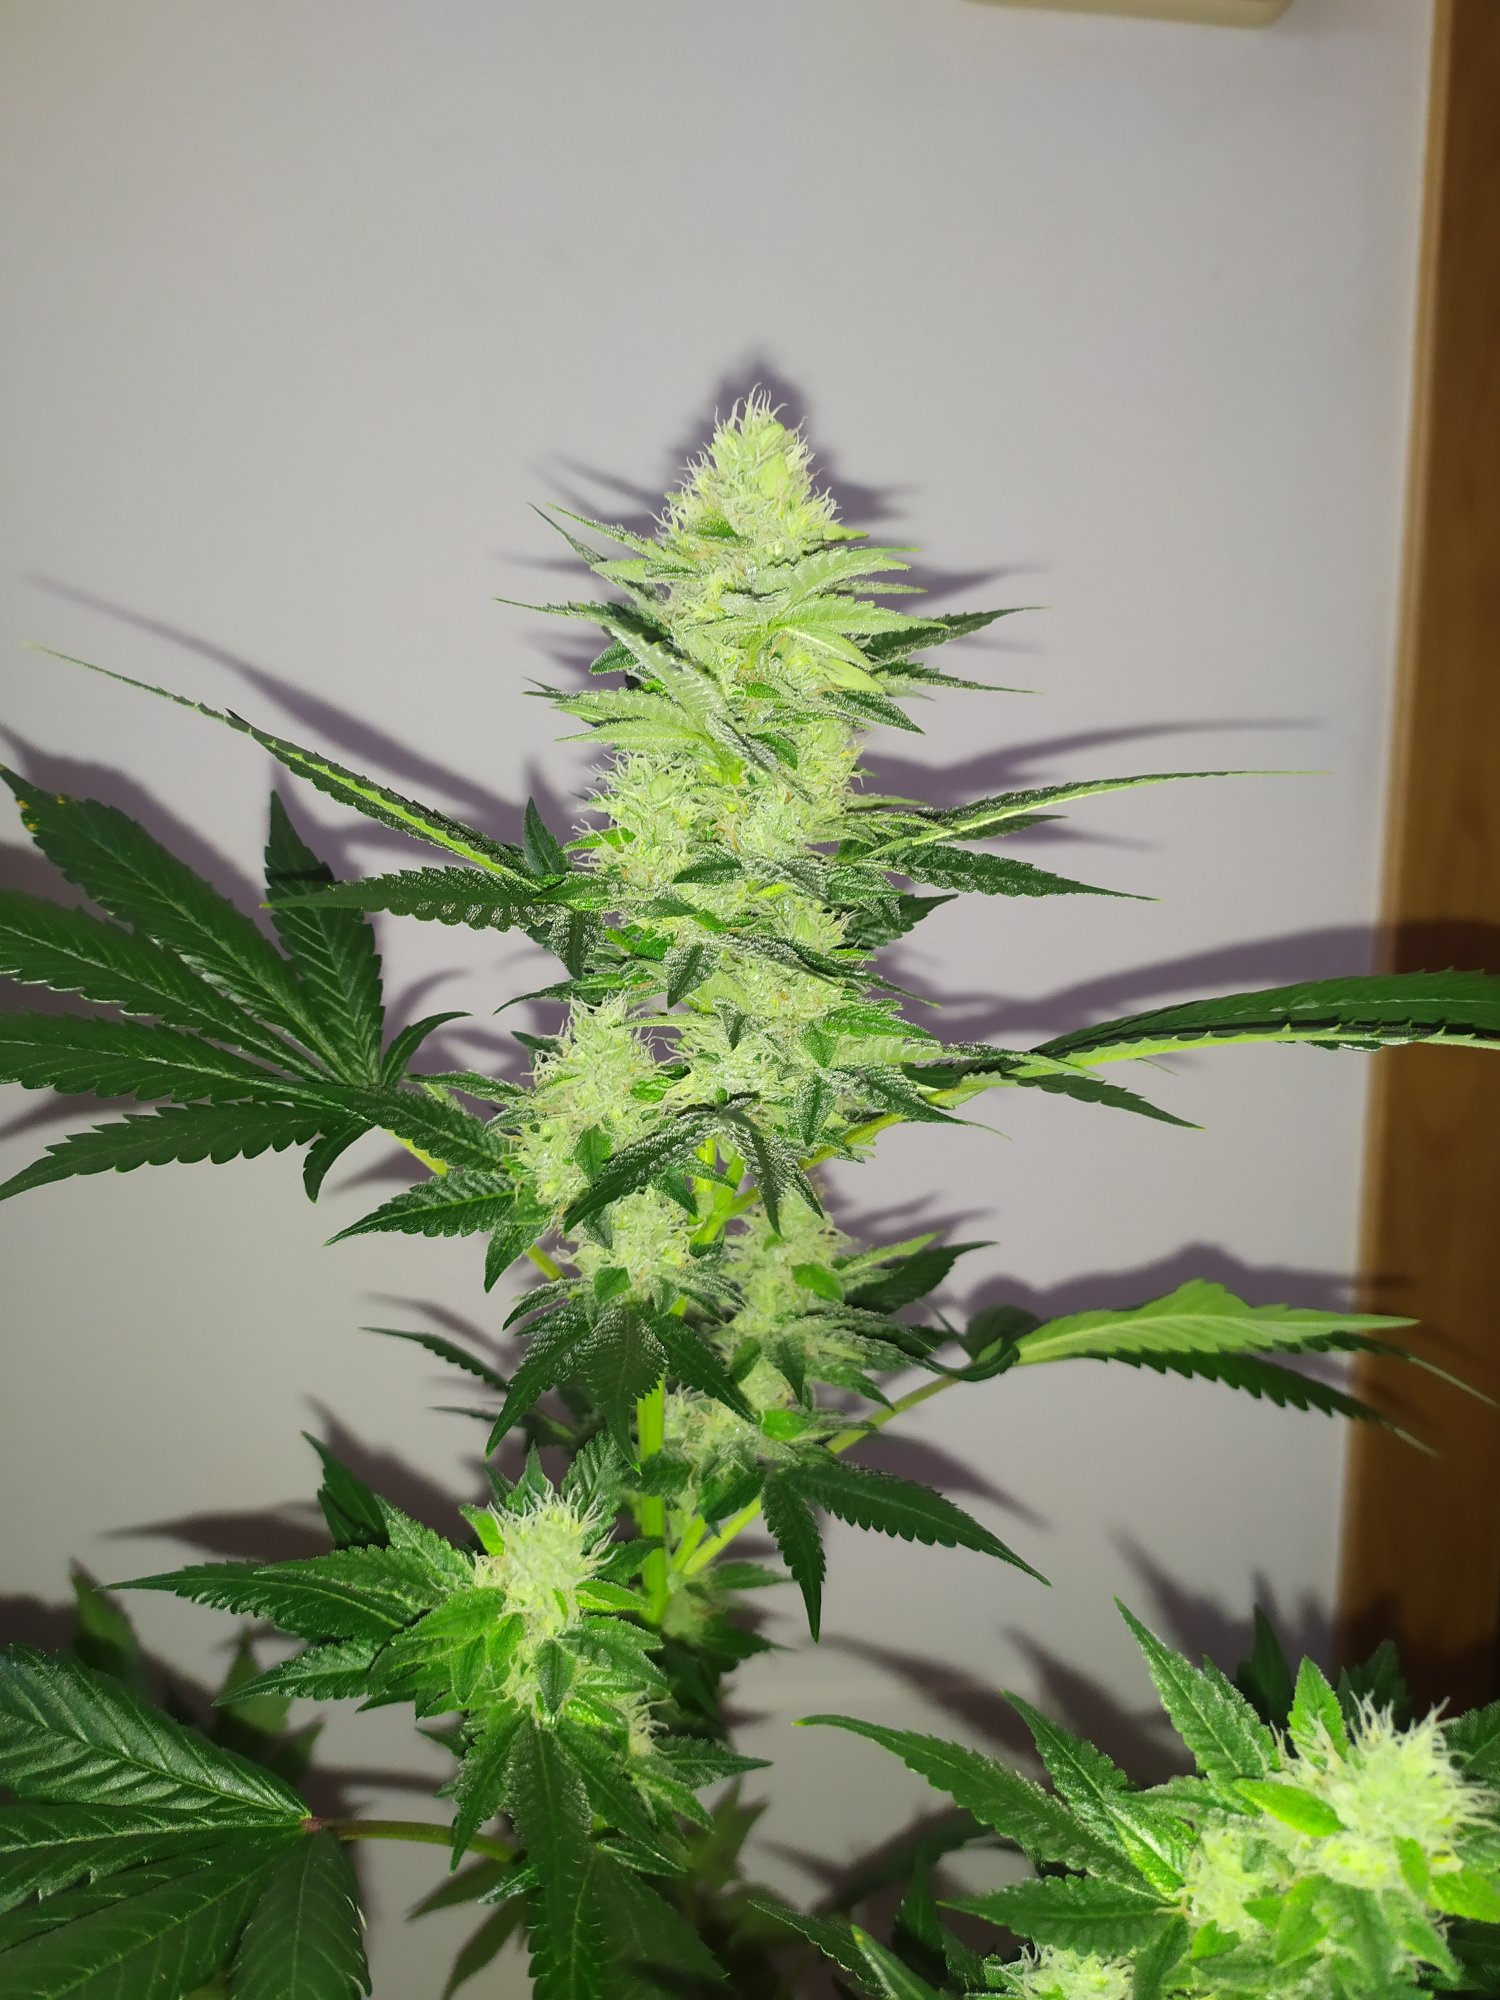 Tips for growing the original gg4 cut